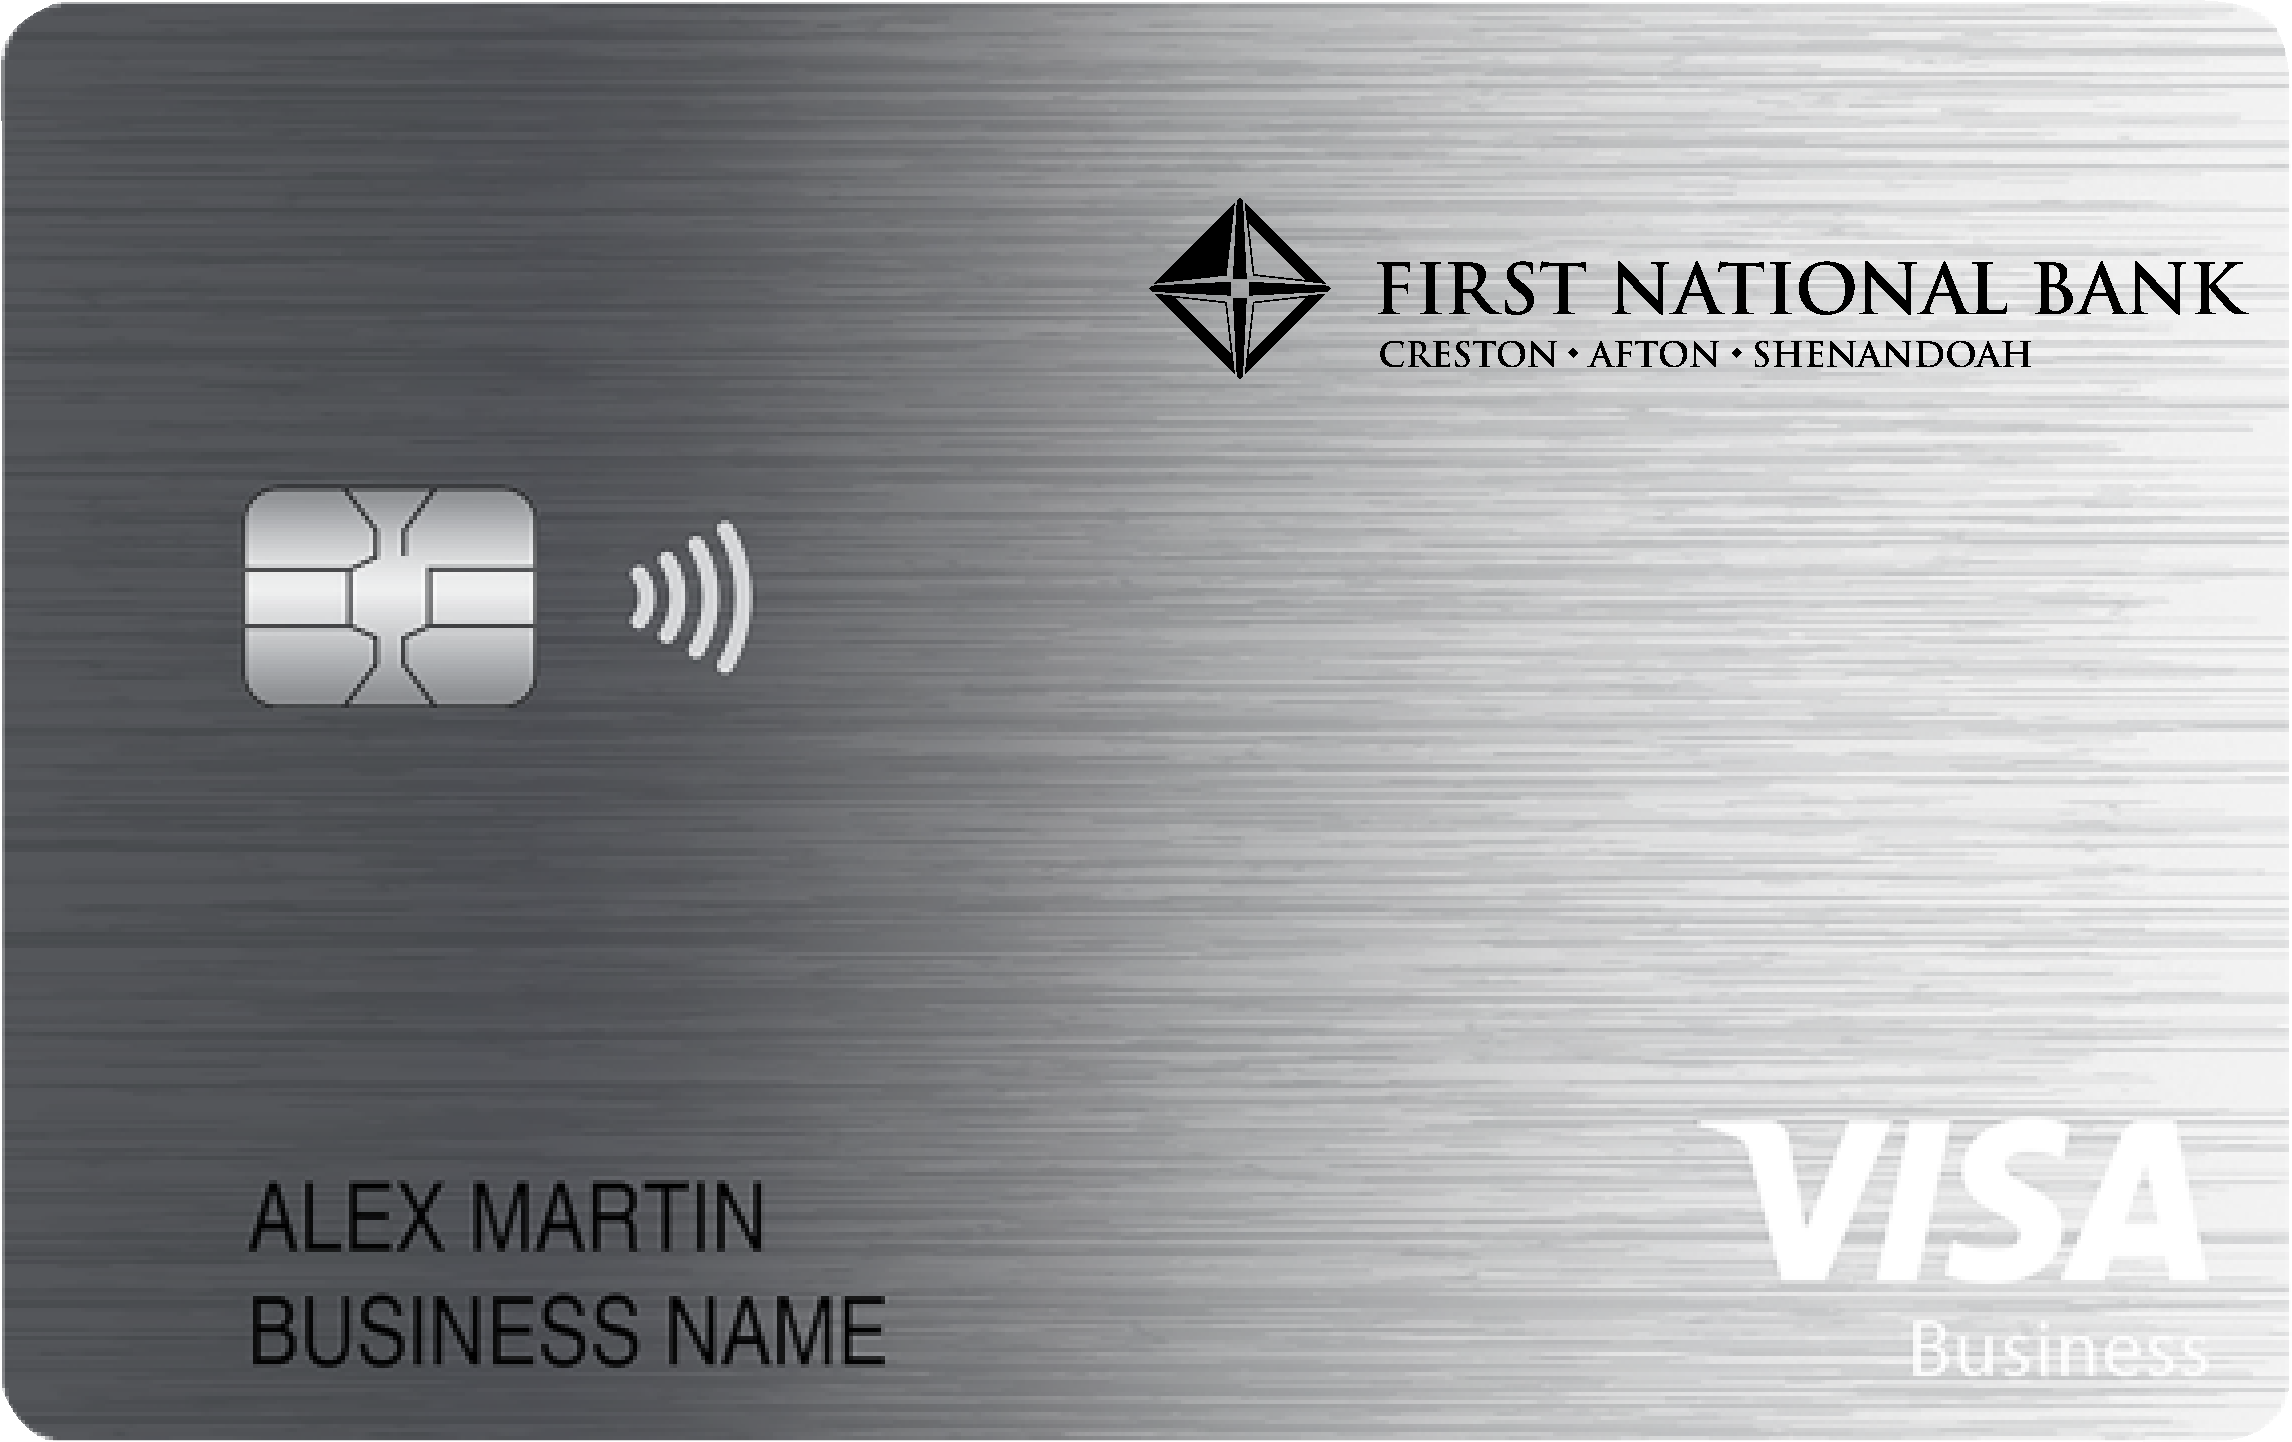 First National Bank in Creston Business Card Card